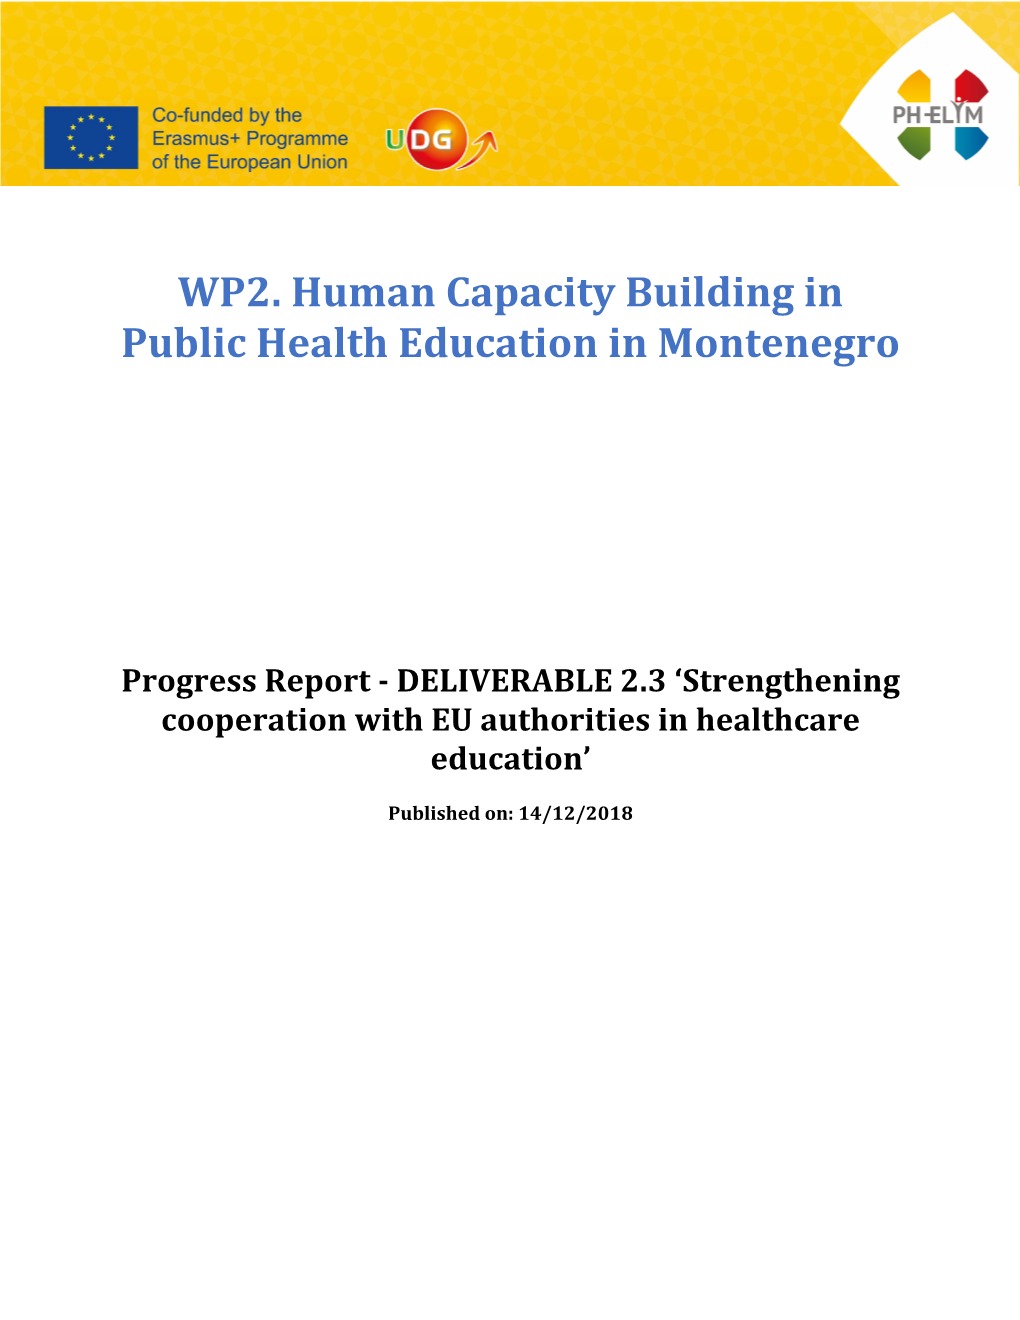 WP2. Human Capacity Building in Public Health Education in Montenegro